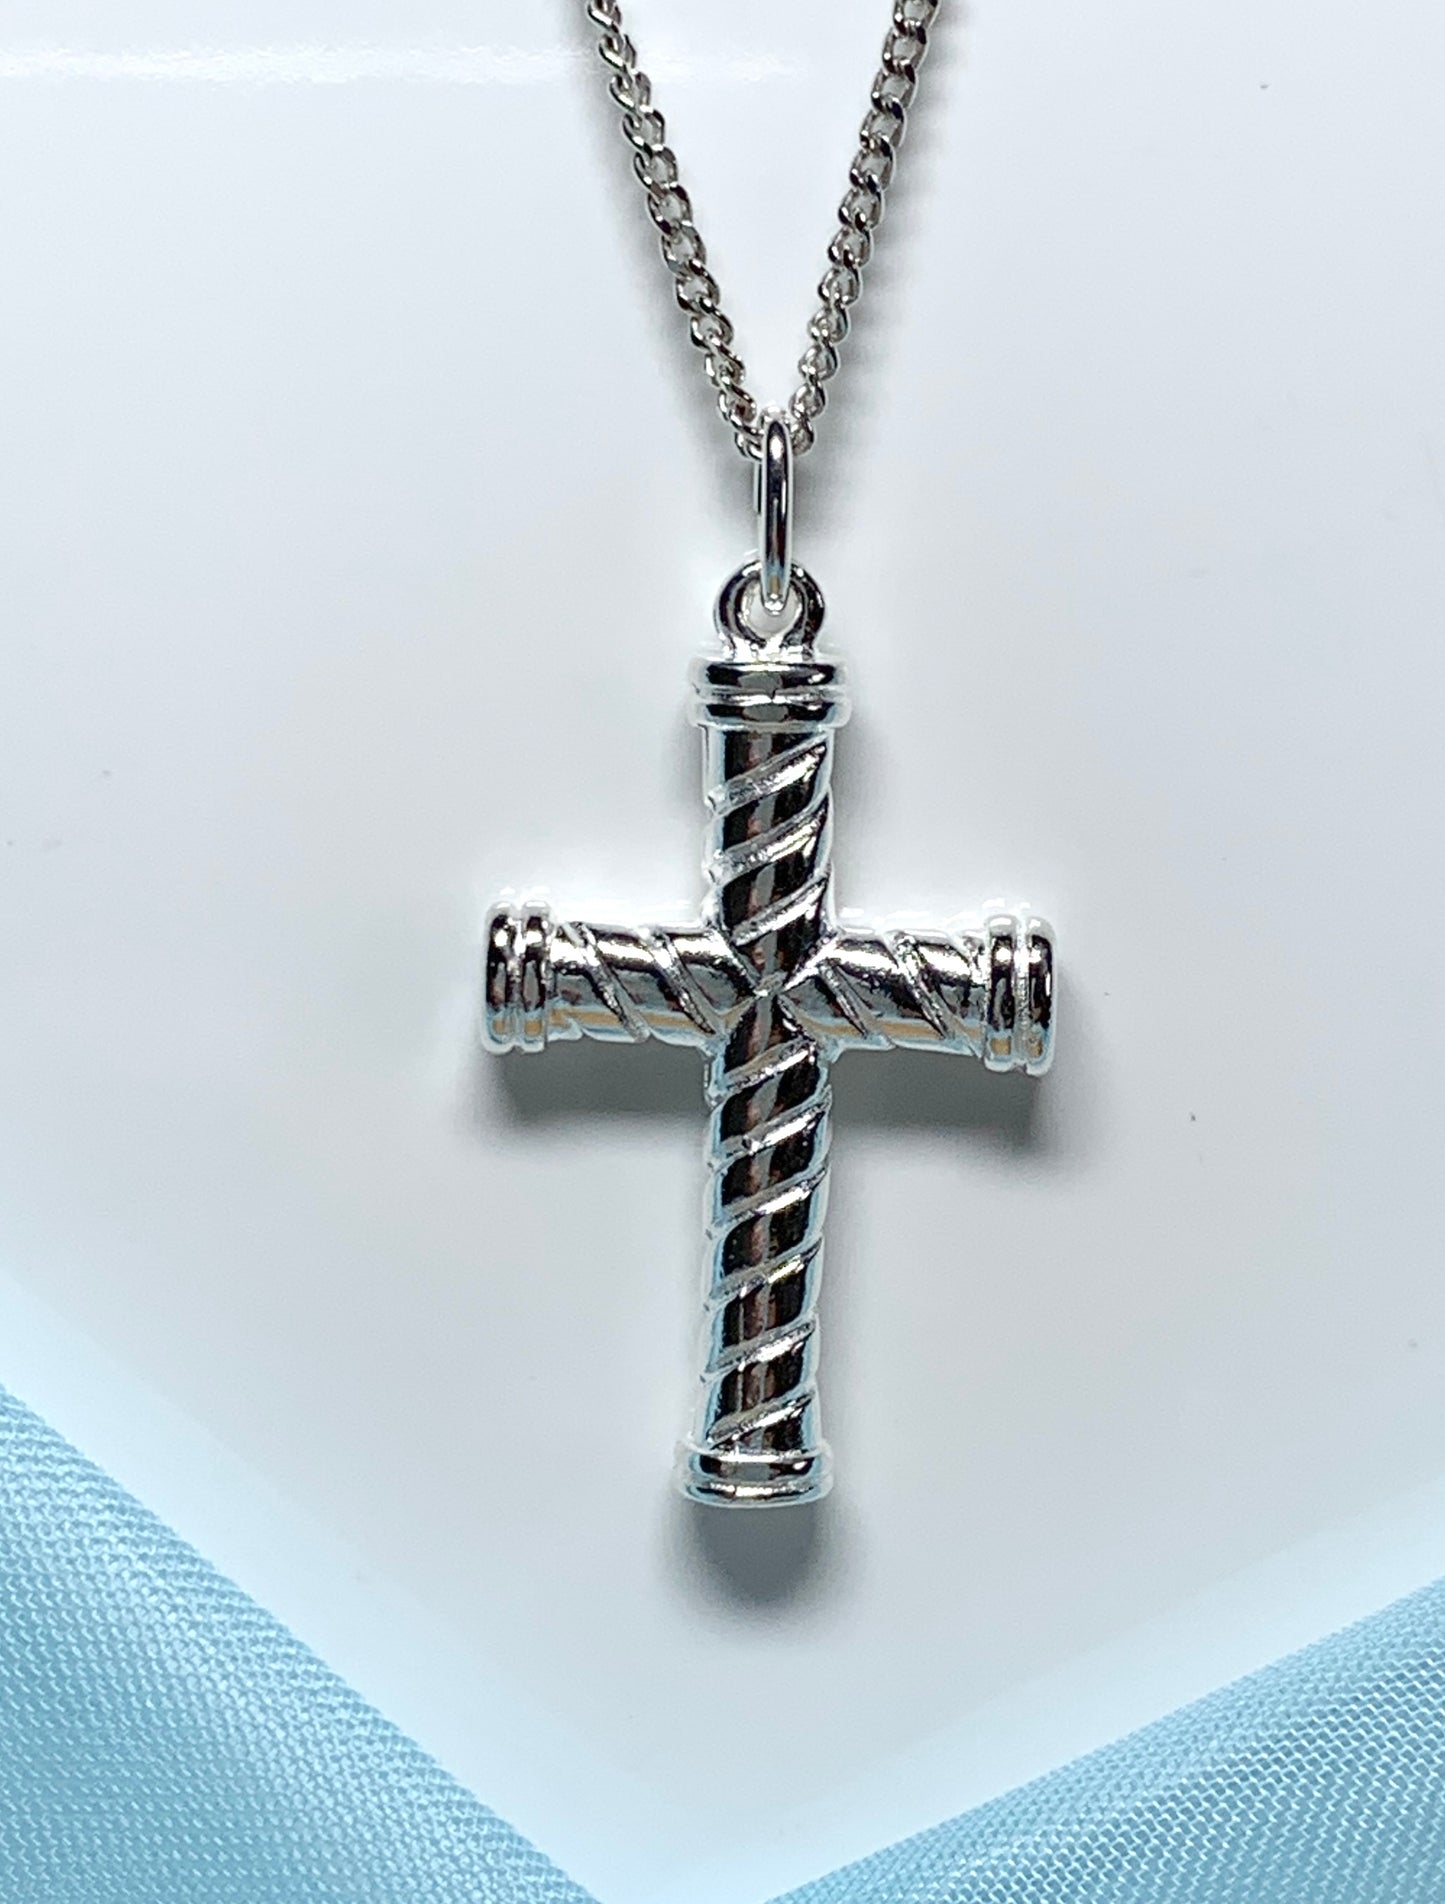 Large diamond cut cross patterned sterling silver and chain